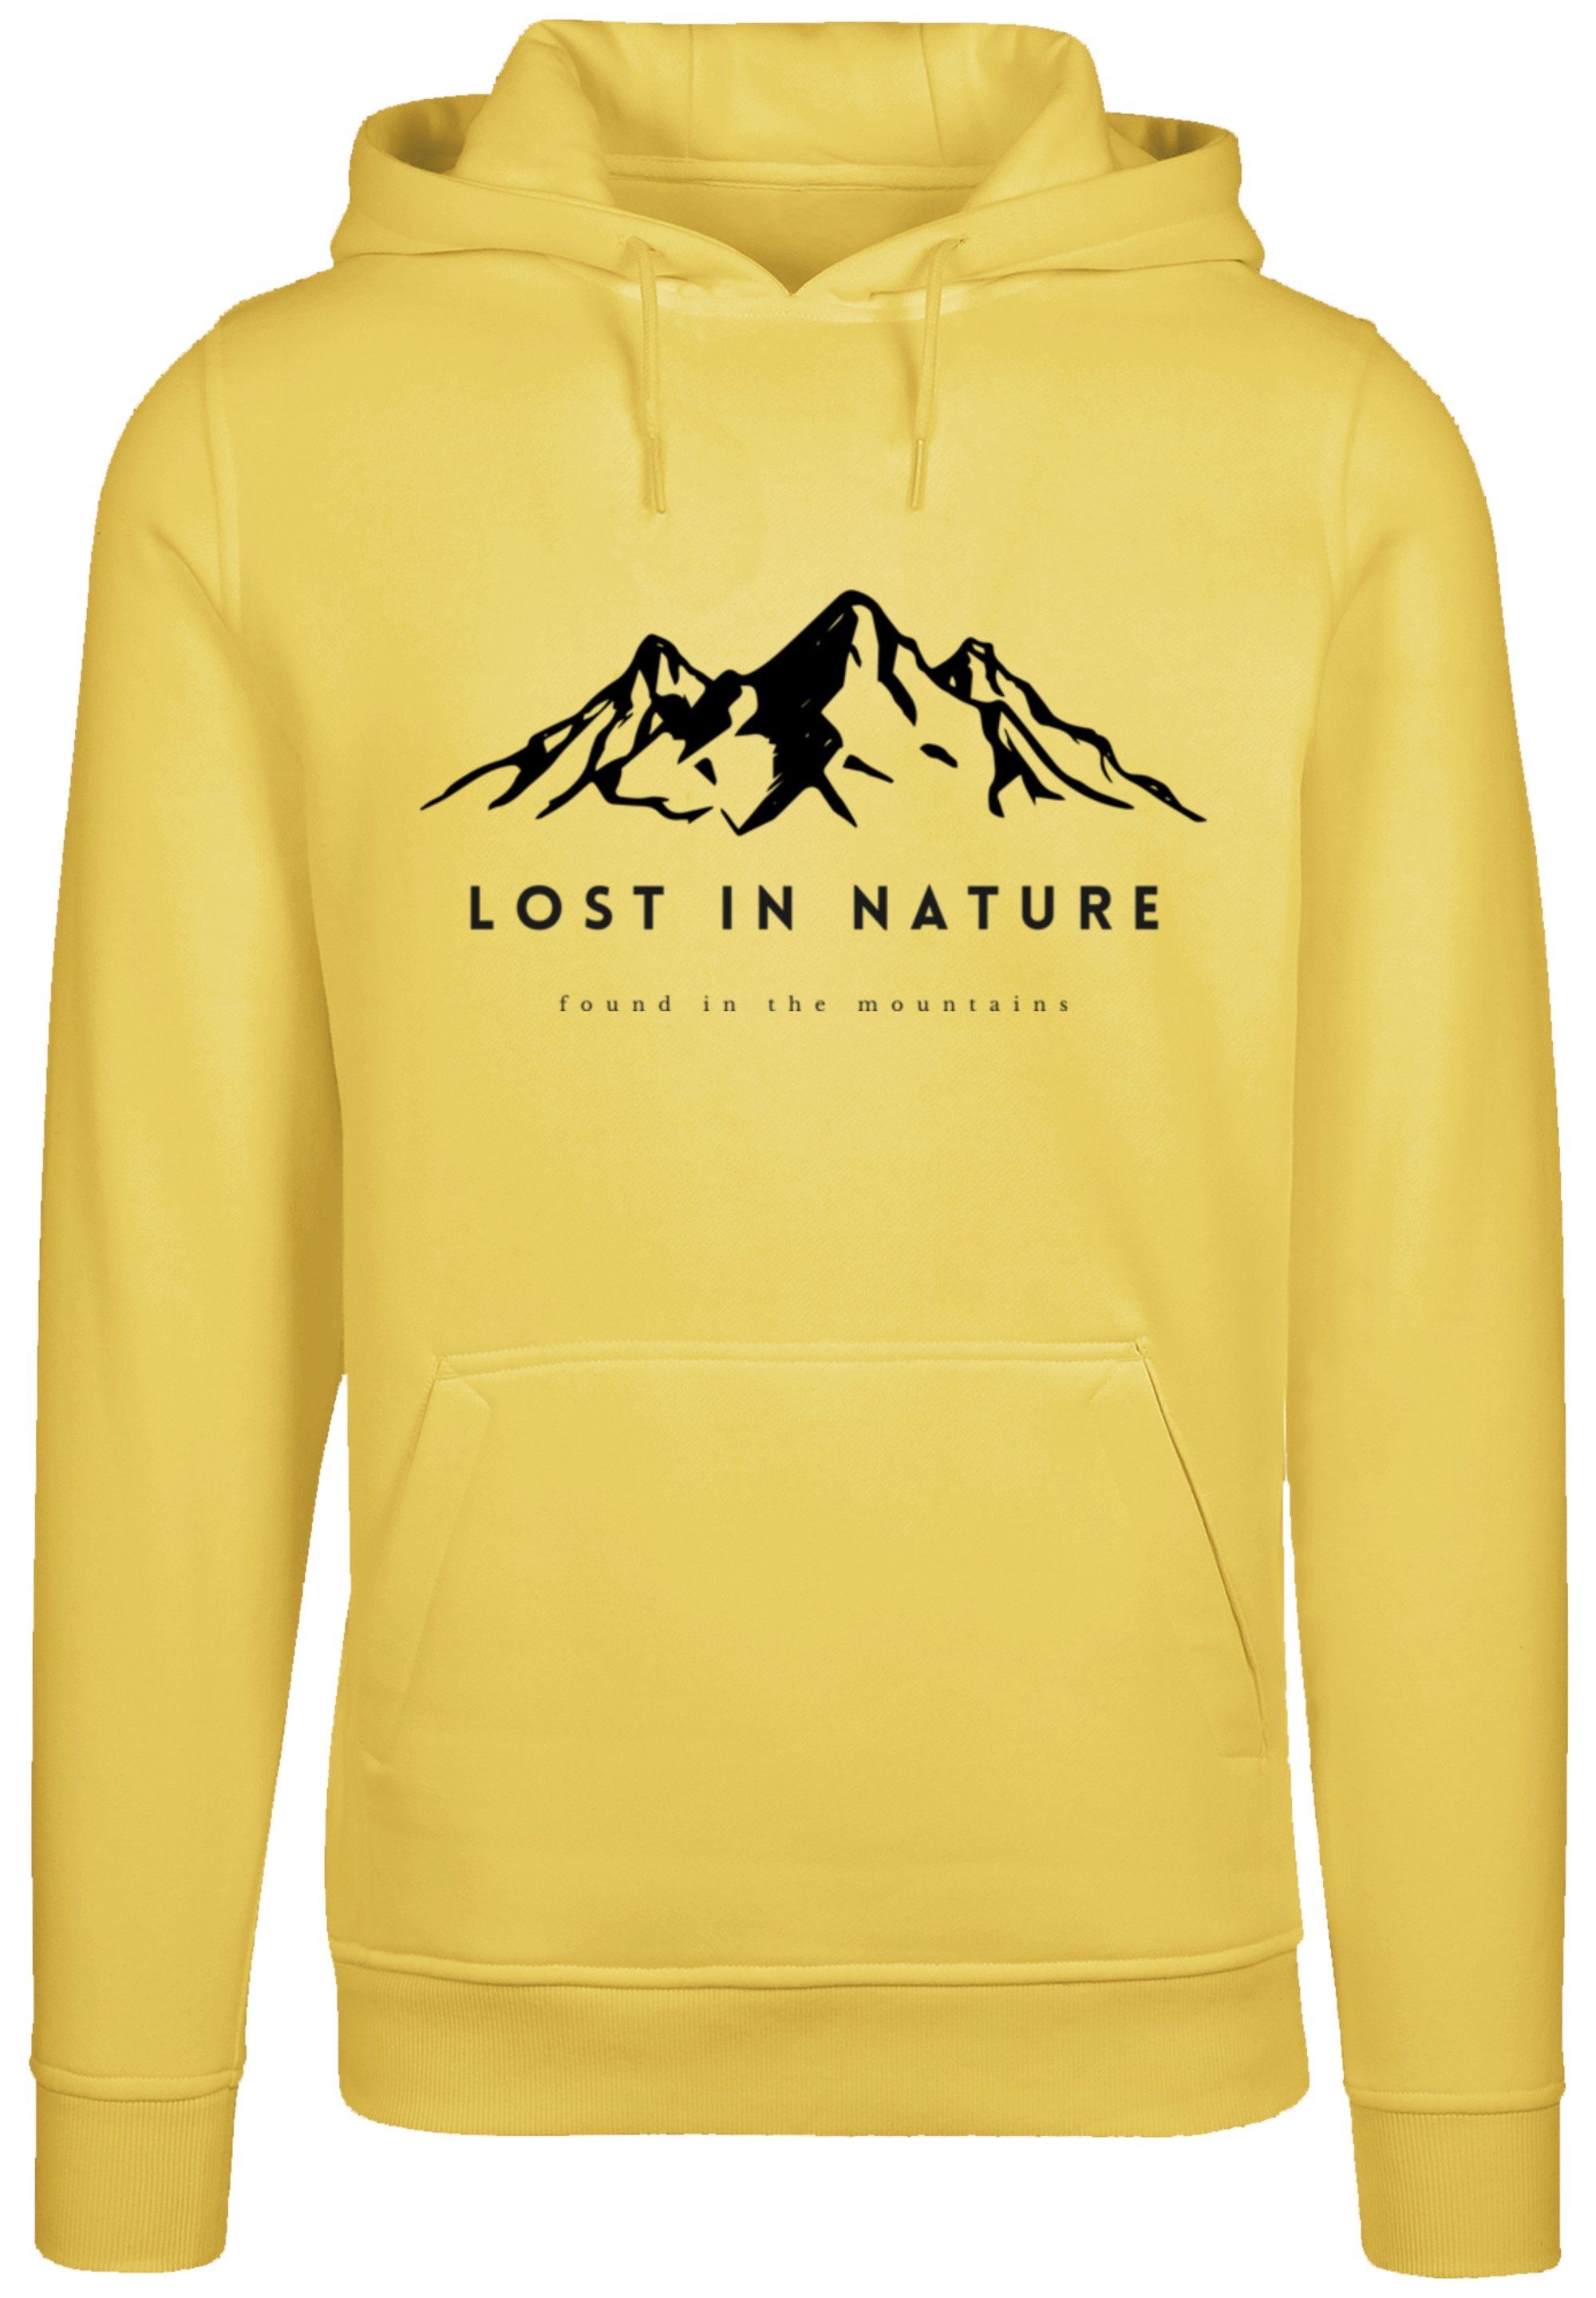 F4NT4STIC Kapuzenpullover Lost in nature Hoodie, Warm, Bequem taxi yellow